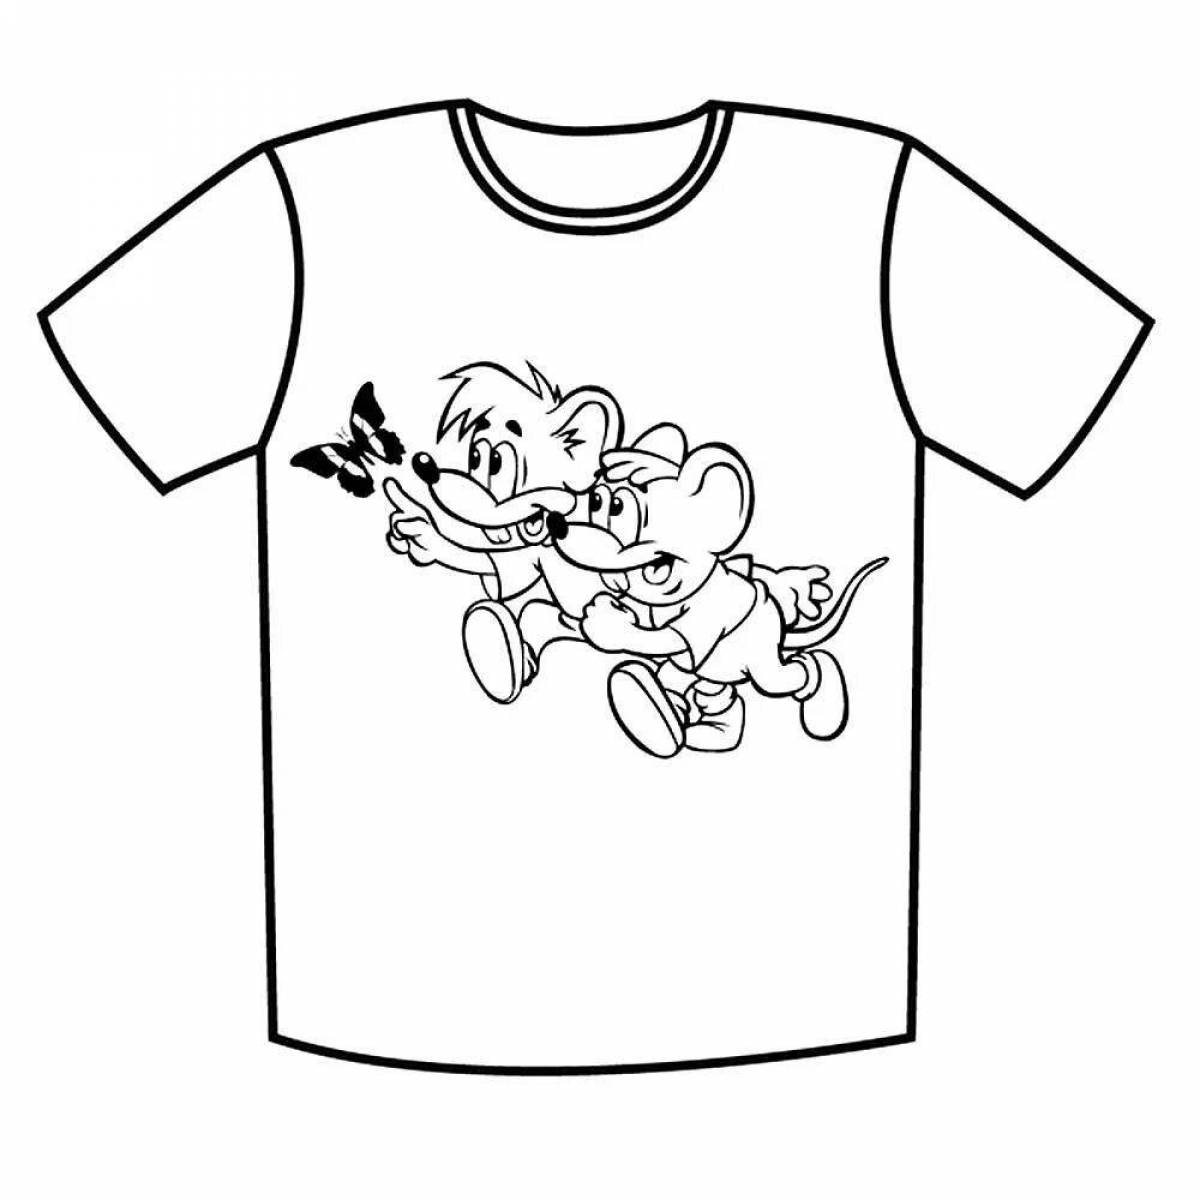 Coloring page exquisite t-shirt for a boy